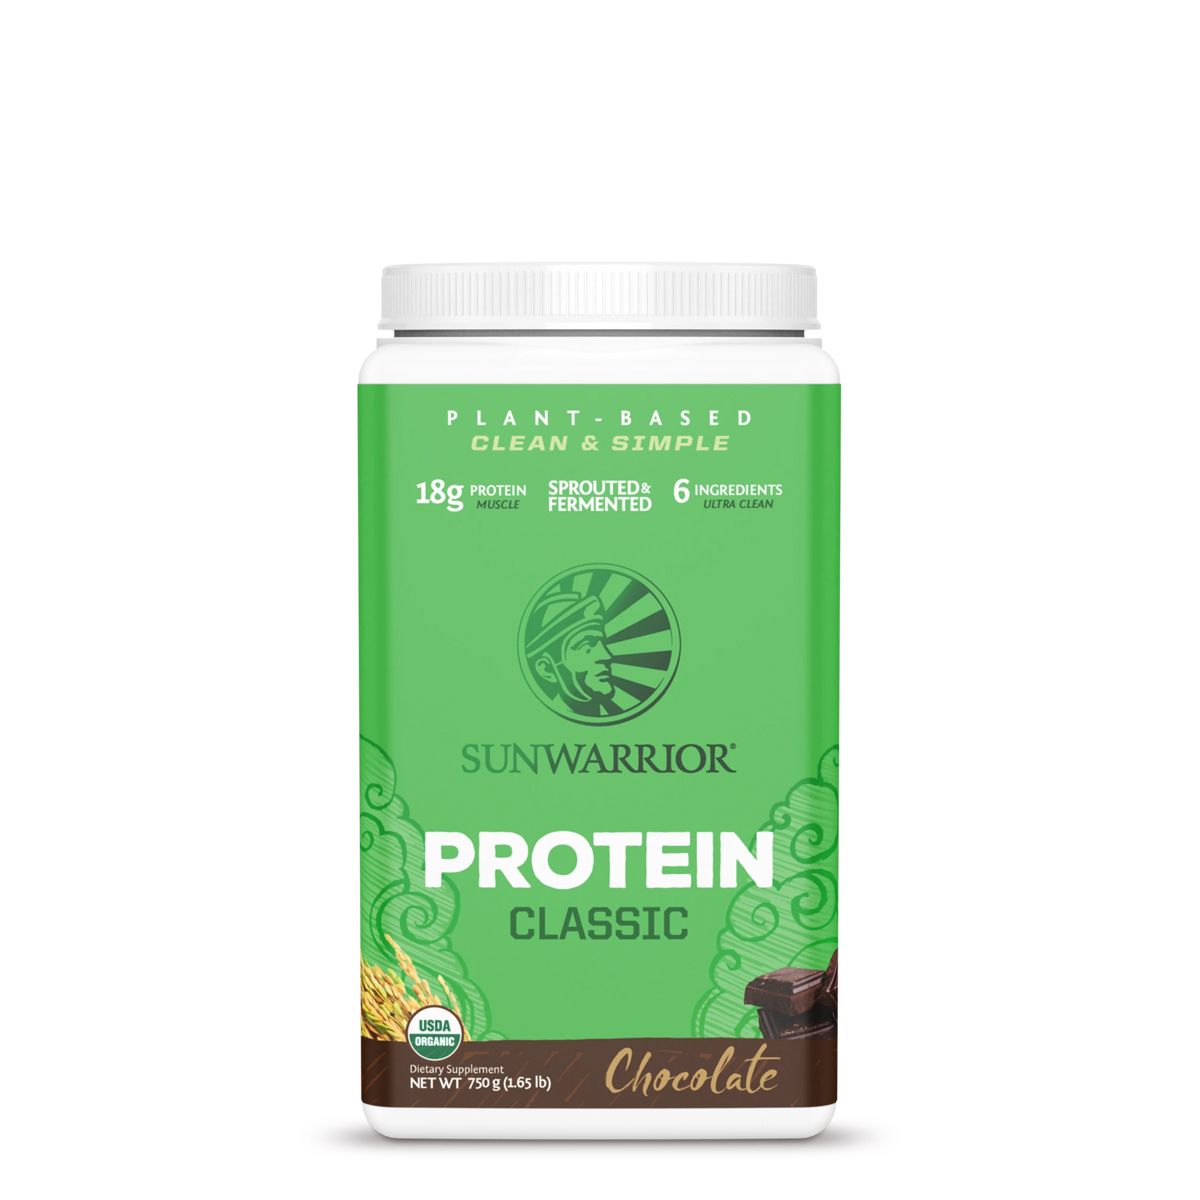 SUNWARRIOR - PLANT BASED CLEAN & SIMPLE PROTEIN - CLASSIC - 750 G